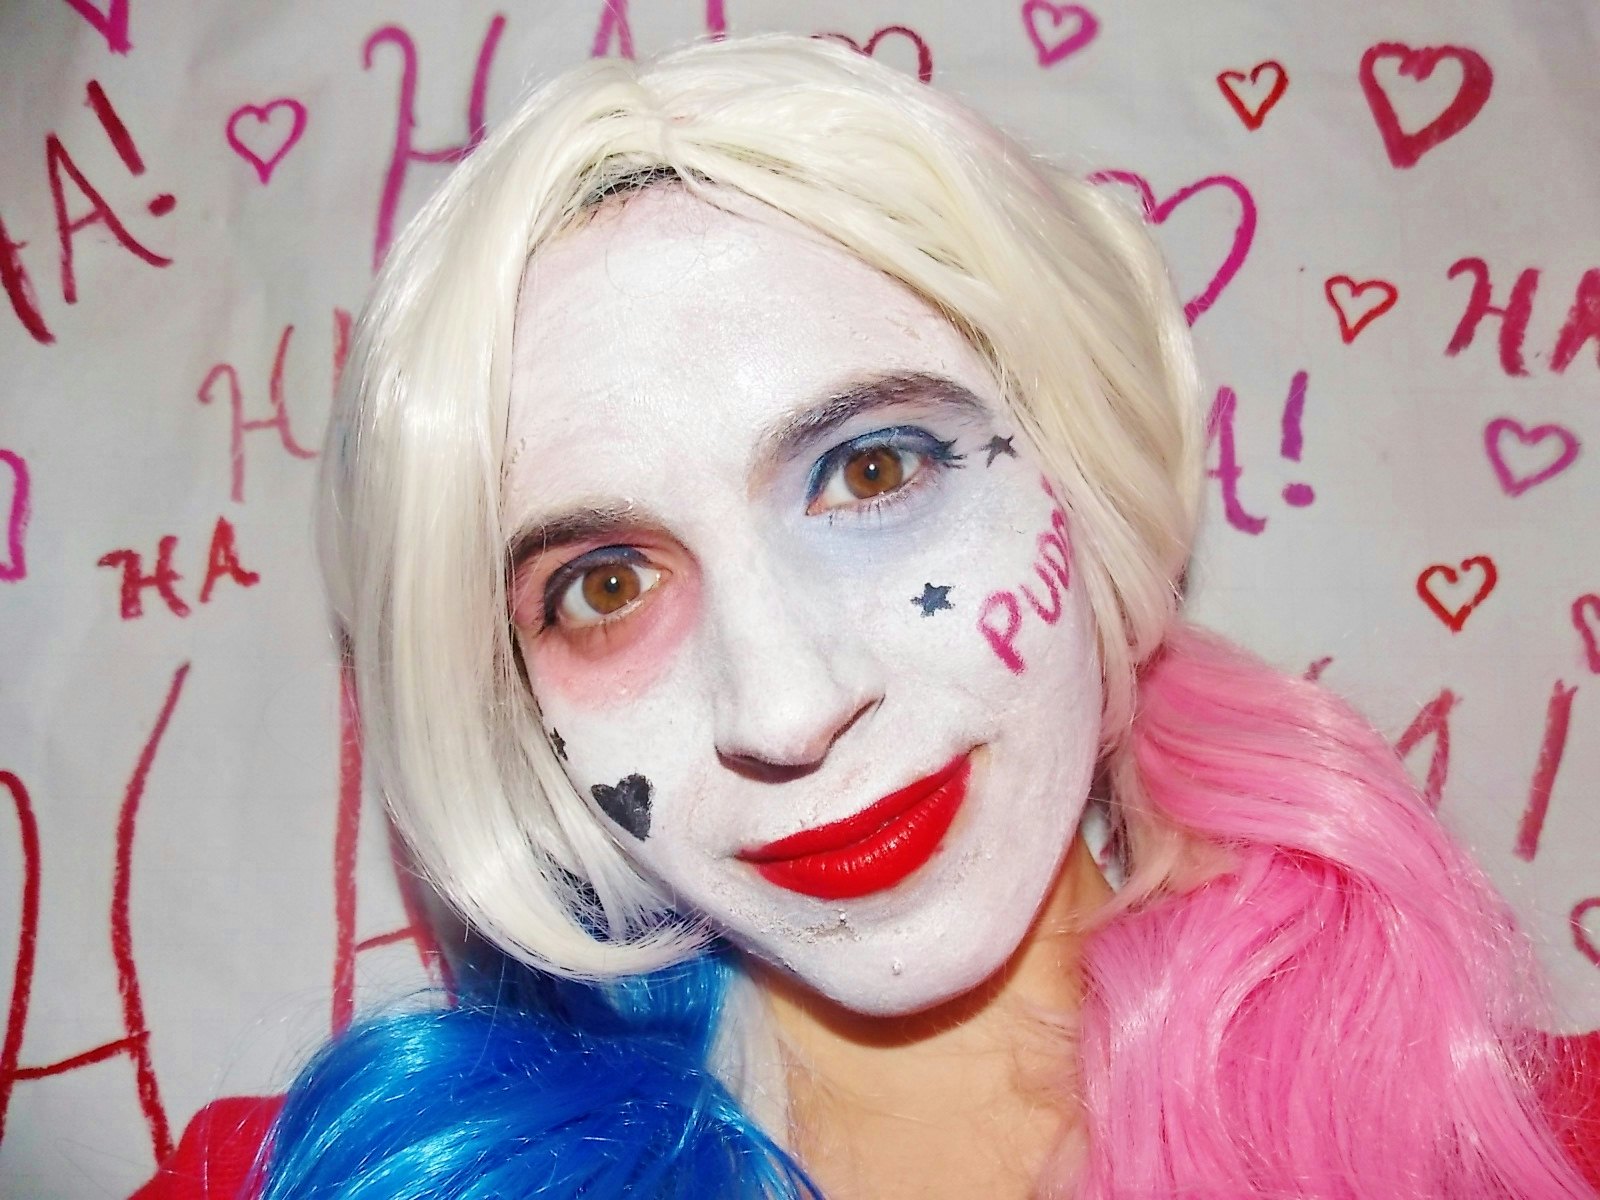 A Harley Quinn Makeup Tutorial So You Can Get A Suicide Squad Look